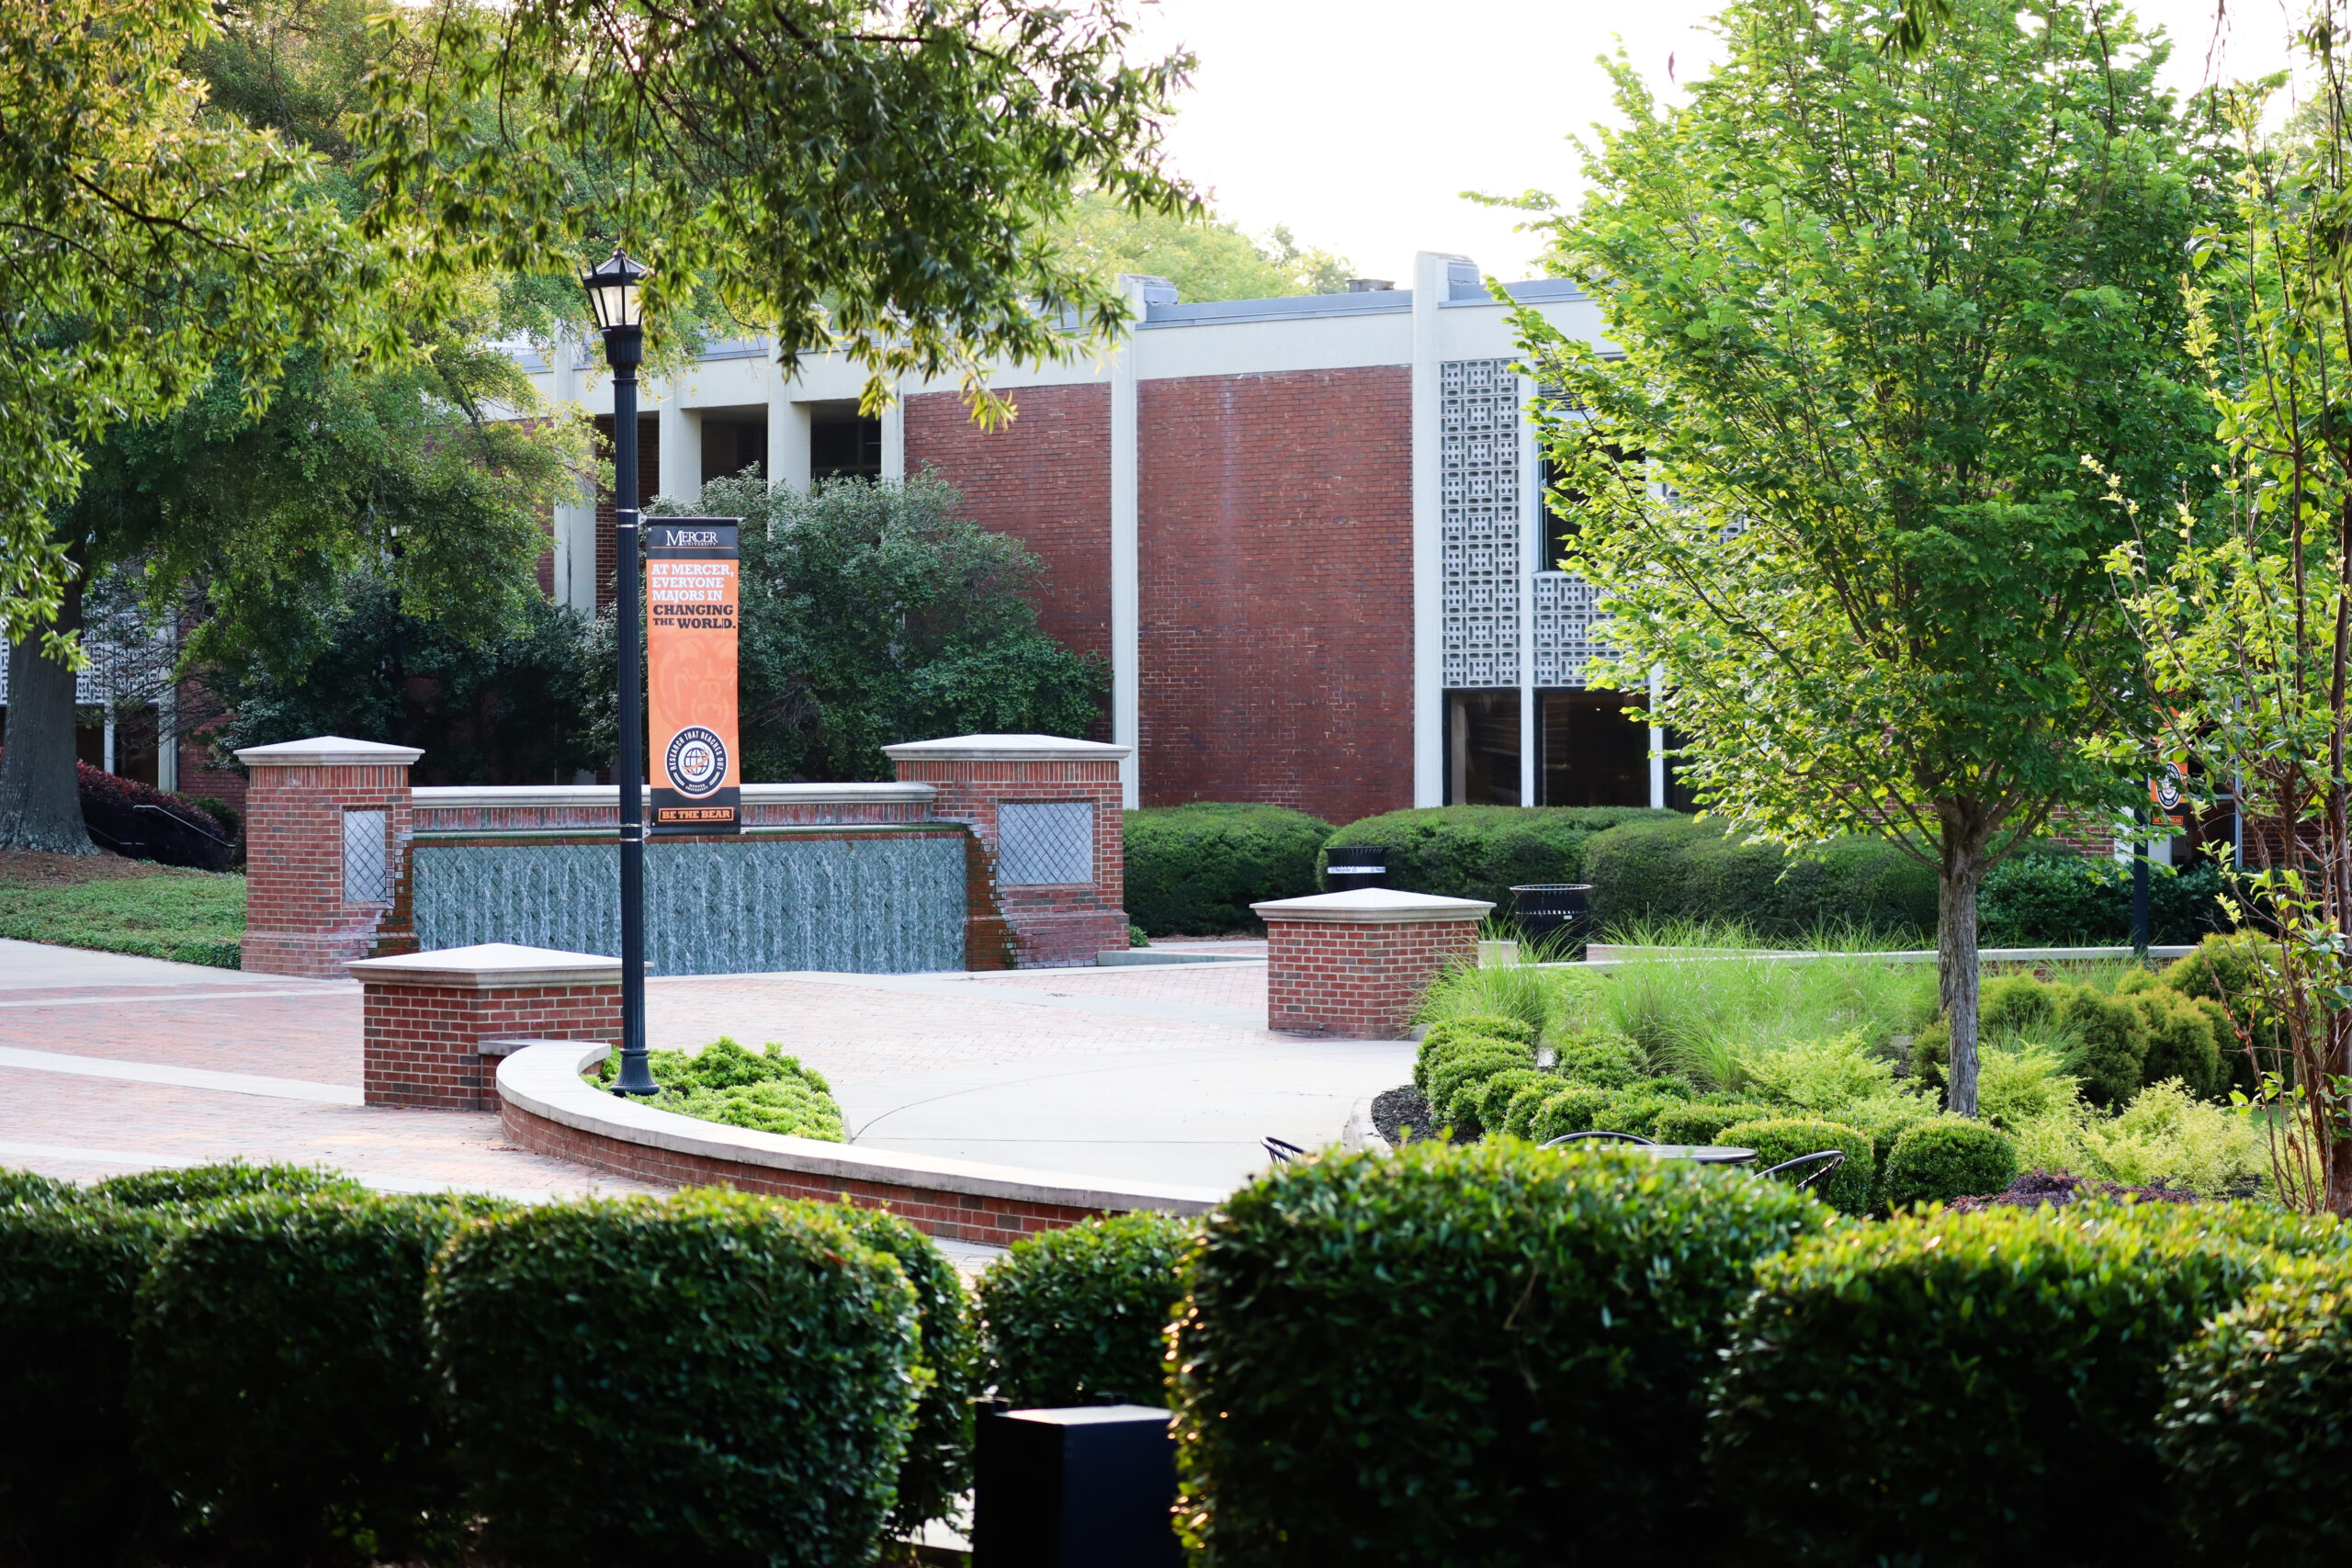 A view of the Macon campus, showing shrubs and a waterfall in front of Connell Student Center.